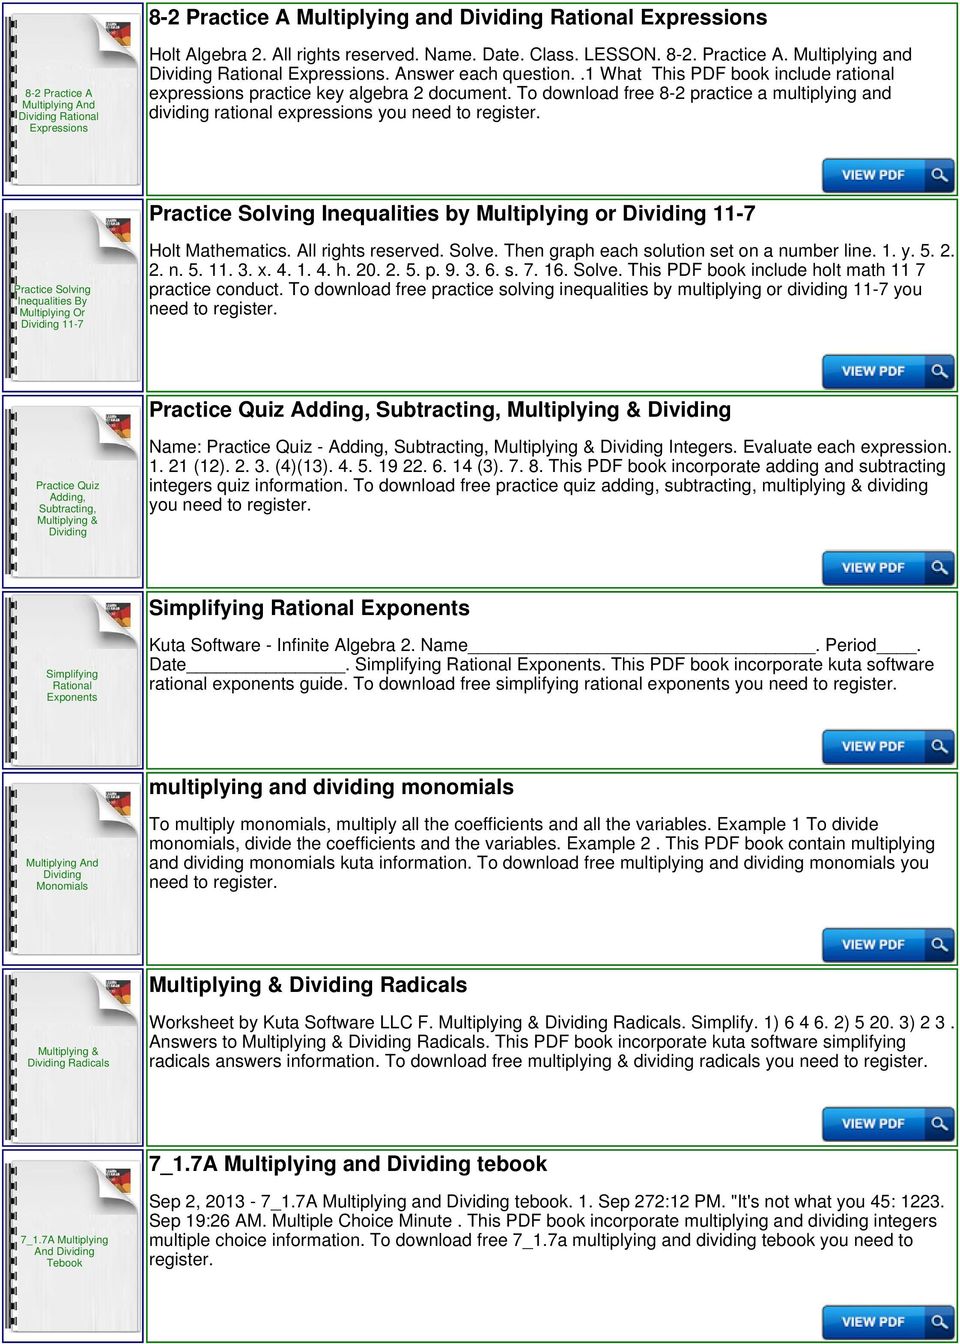 To download free 8-2 practice a multiplying and dividing rational expressions you Practice Solving Inequalities by Multiplying or 11-7 Practice Solving Inequalities By Multiplying Or 11-7 Holt